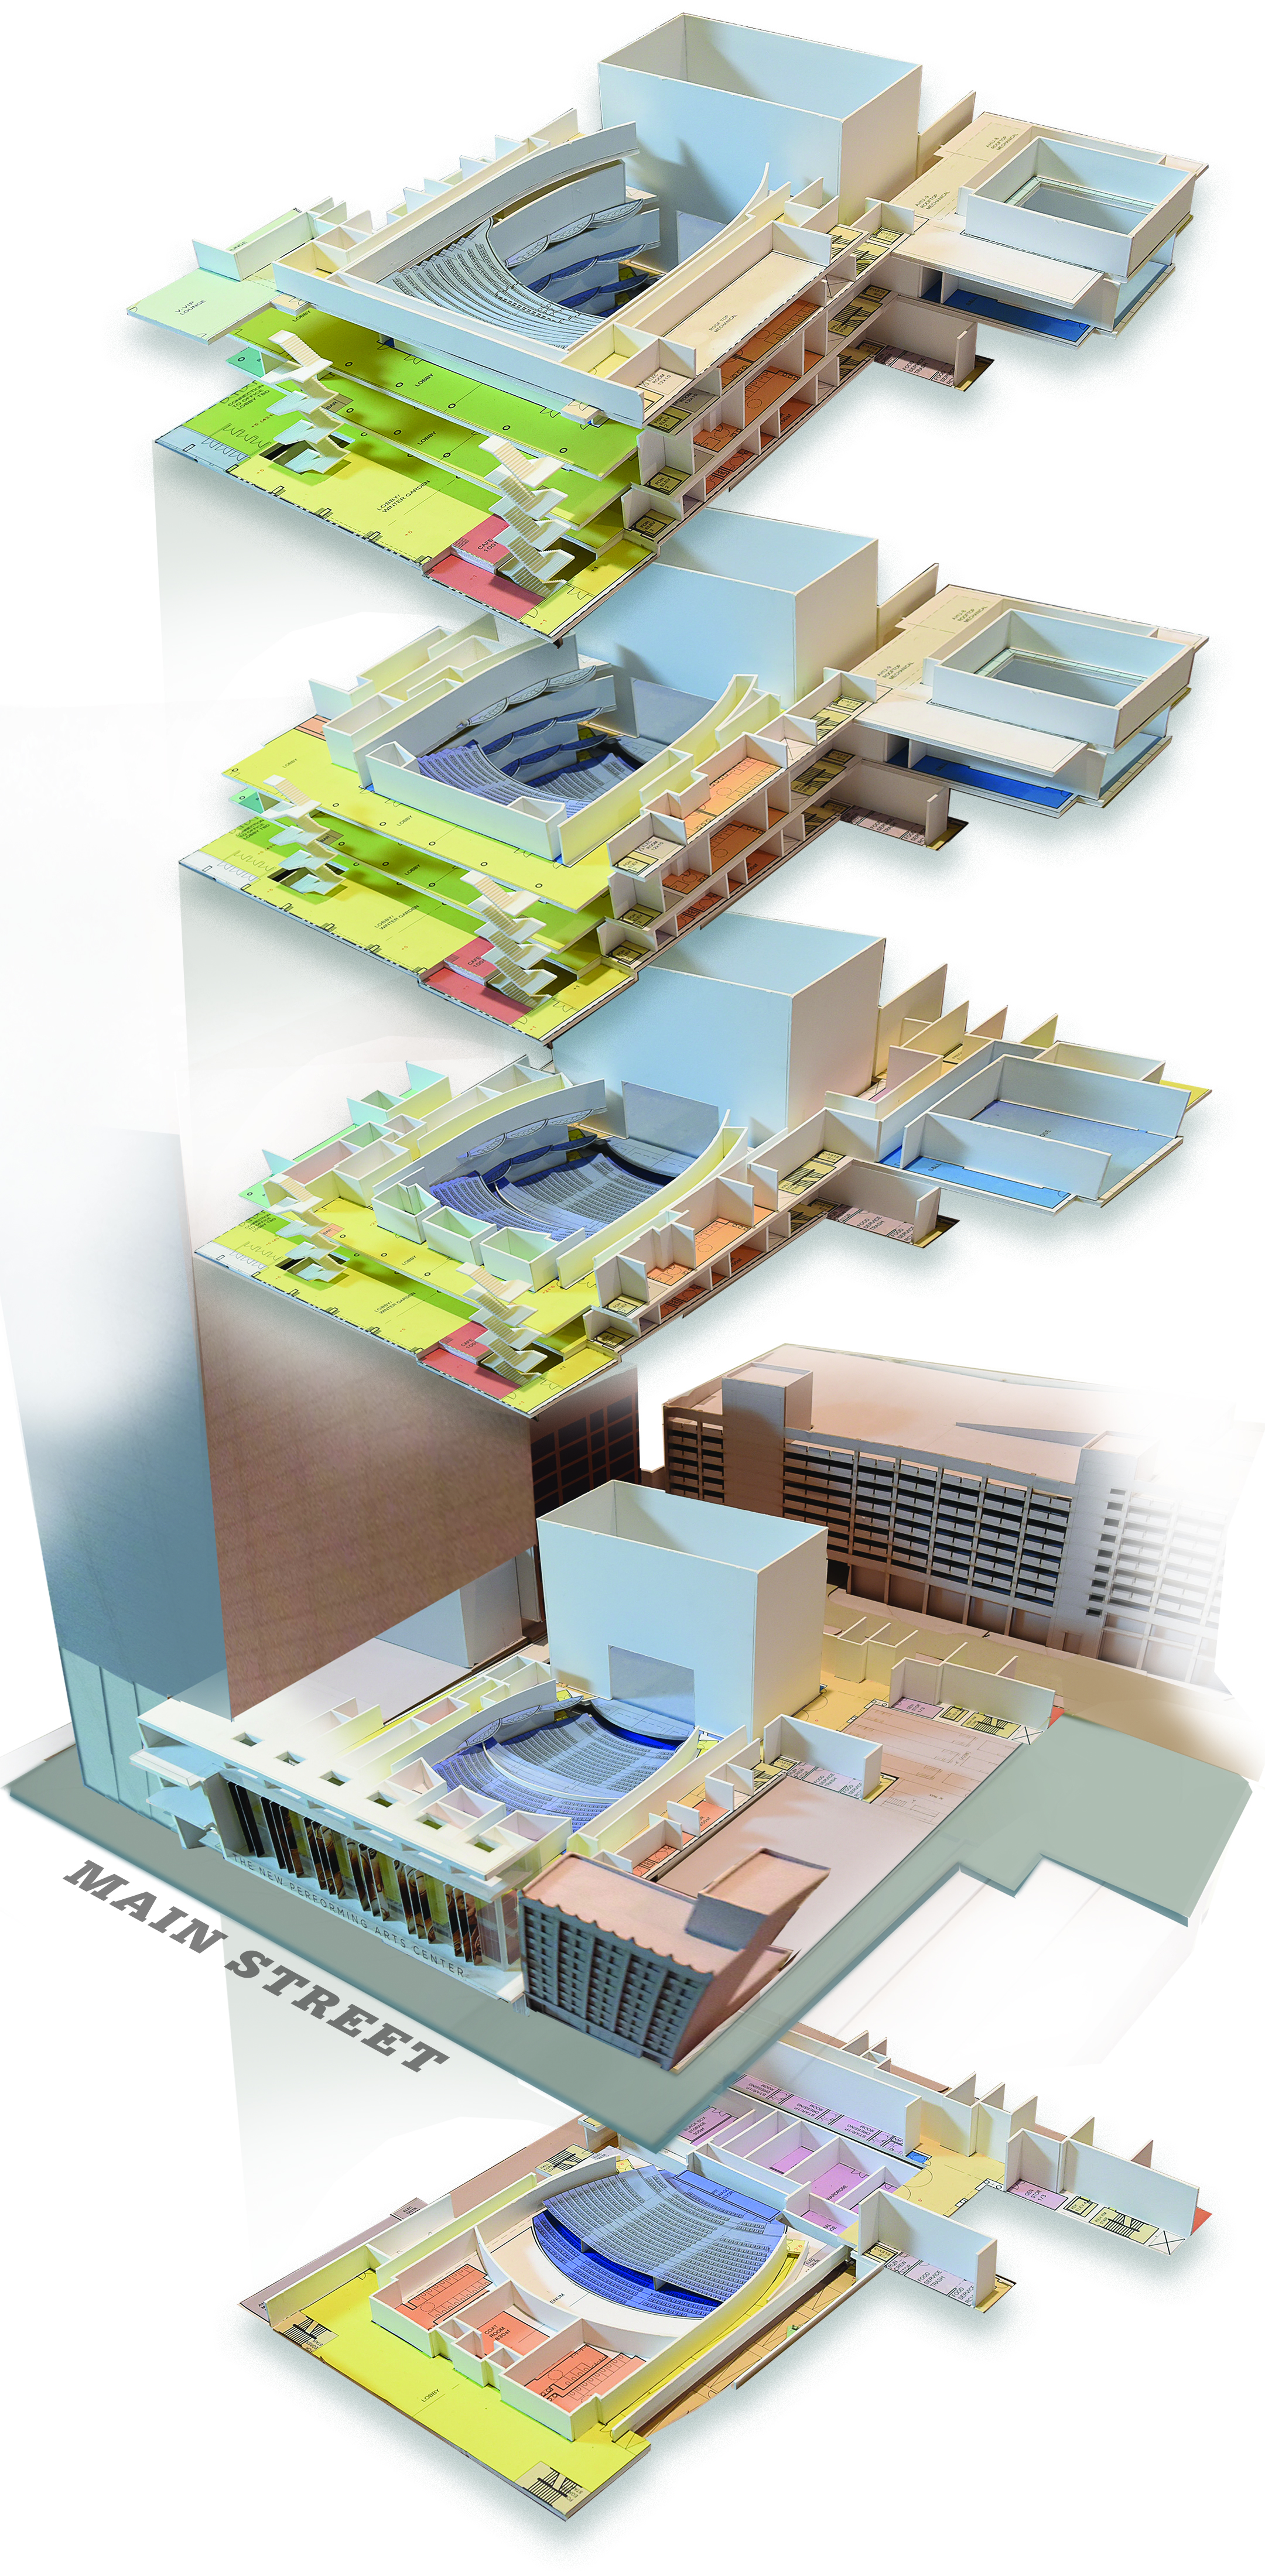 exploded view of eccles theater model shows all 5 levels